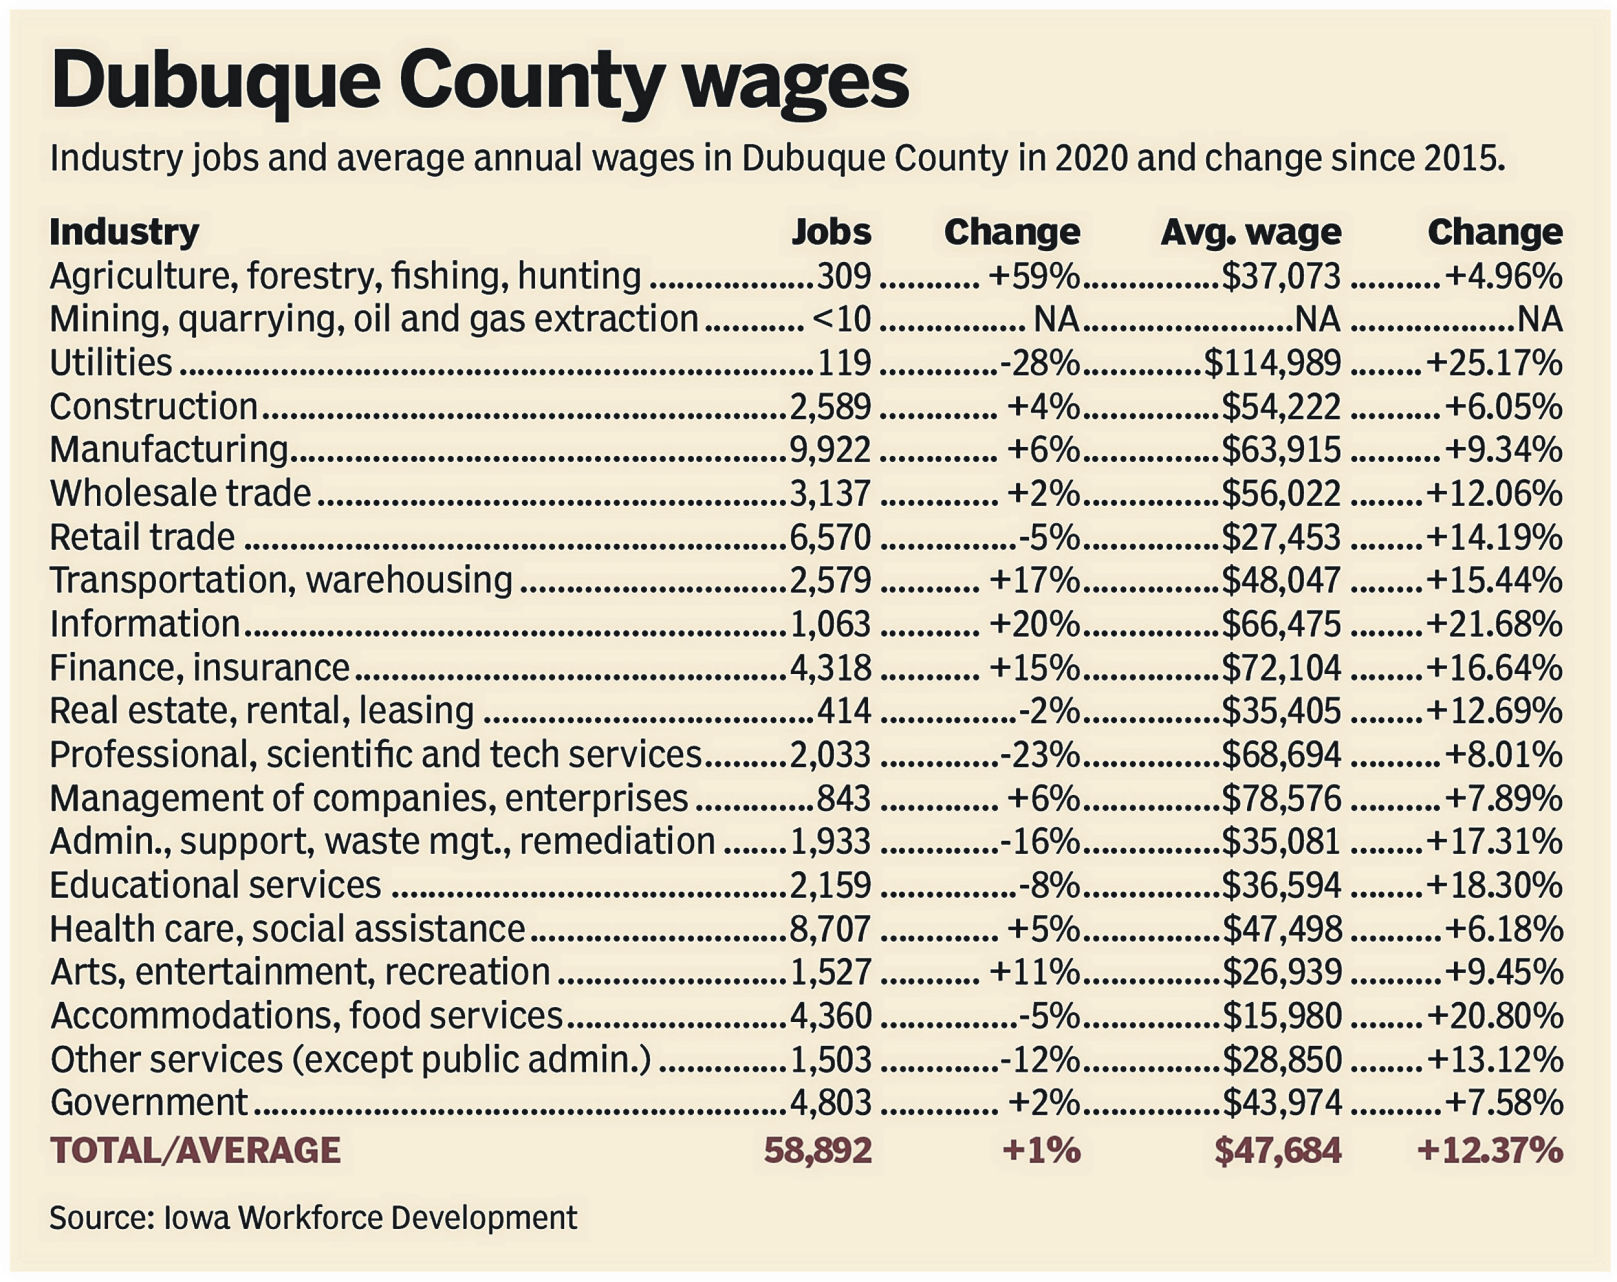 Industry jobs and average annual wages in Dubuque County in 2020 and change since 2015. PHOTO CREDIT: Telegraph Herald